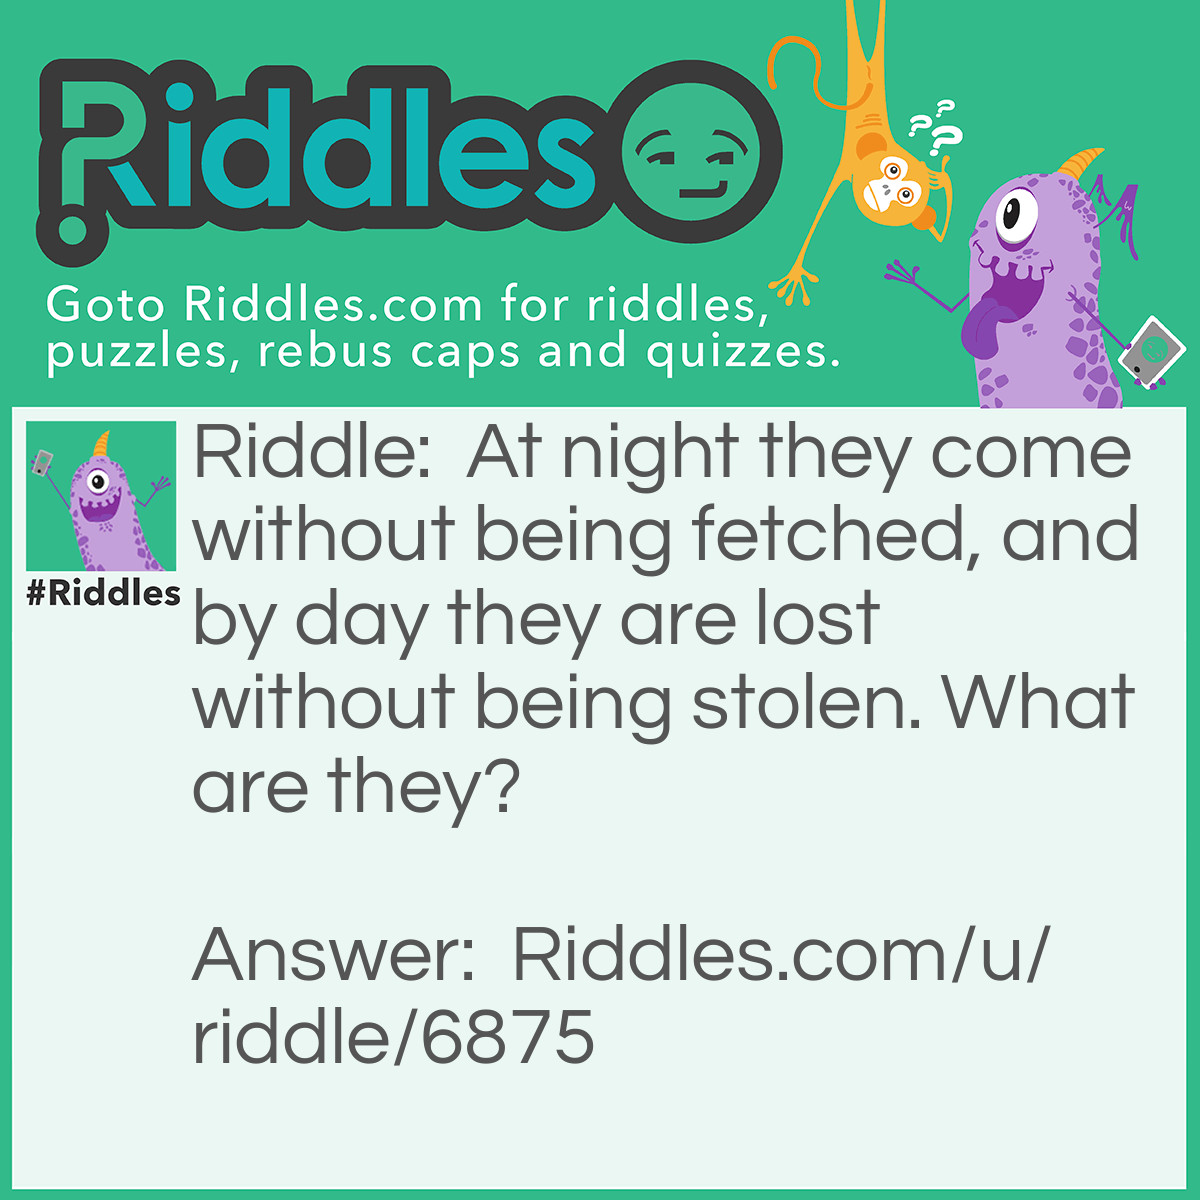 Riddle: At night they come without being fetched, and by day they are lost without being stolen. What are they? Answer: The stars.